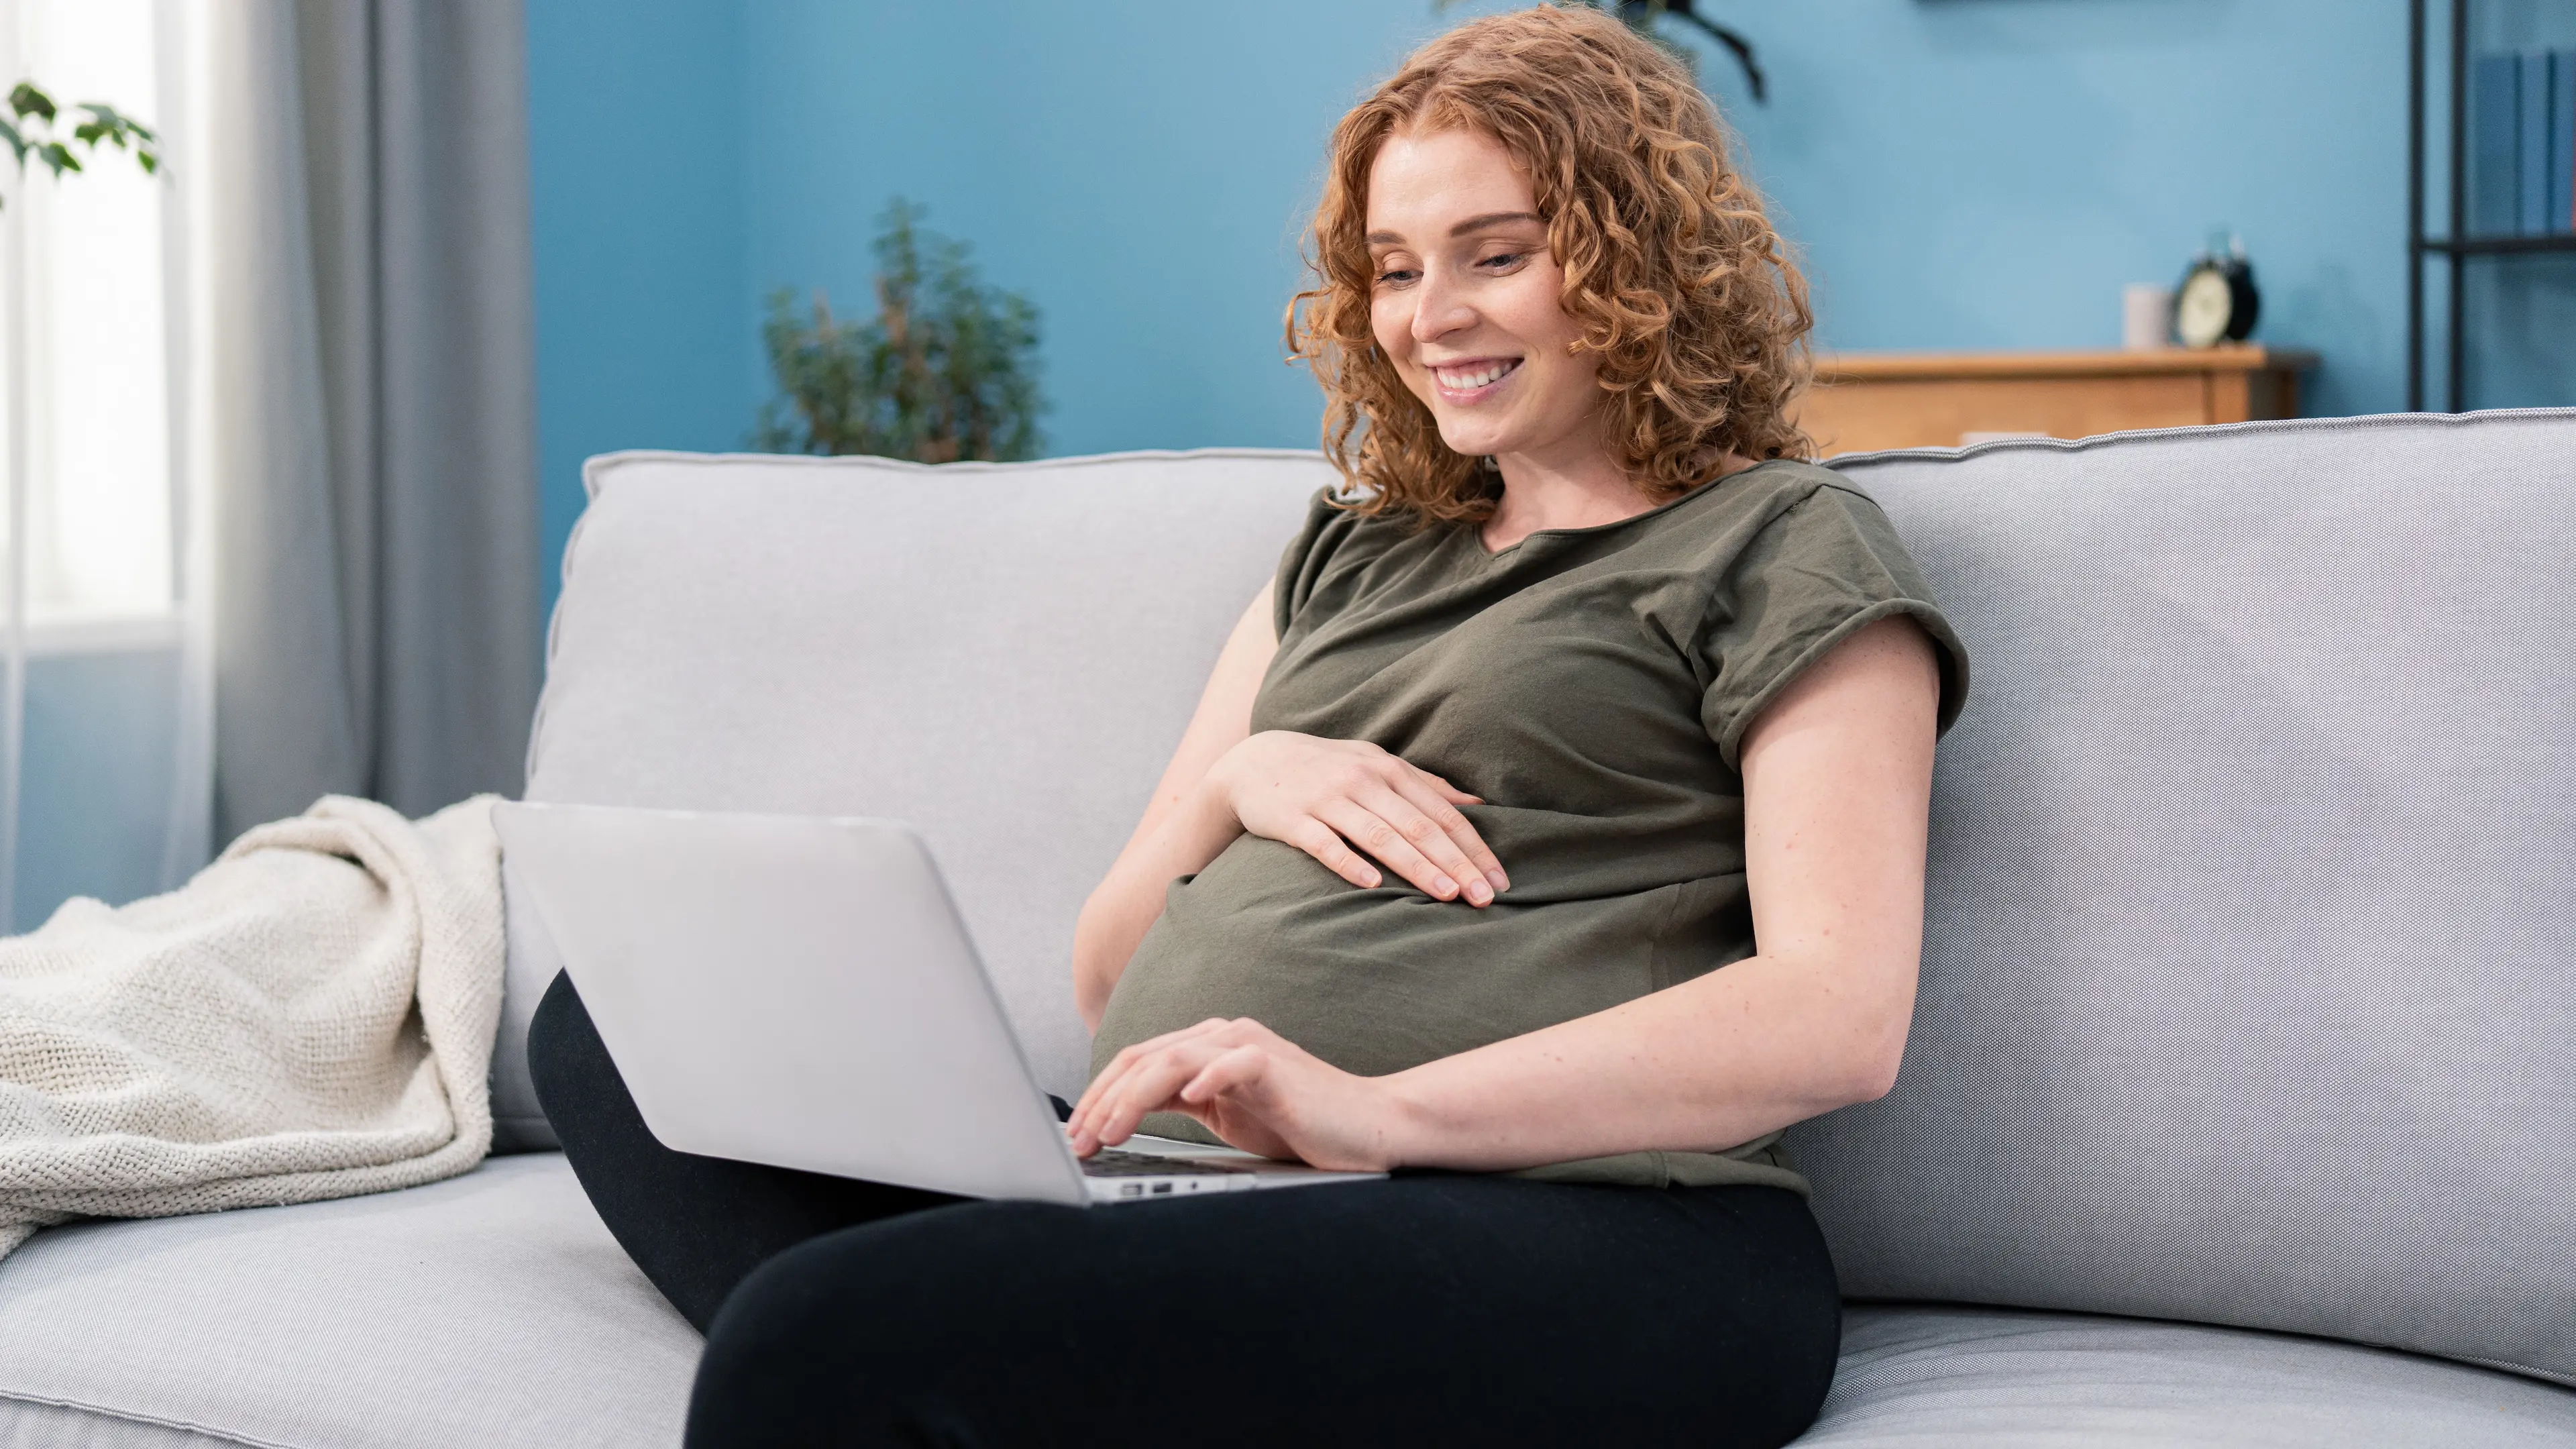 A pregnant woman sitting on a couch using a laptop